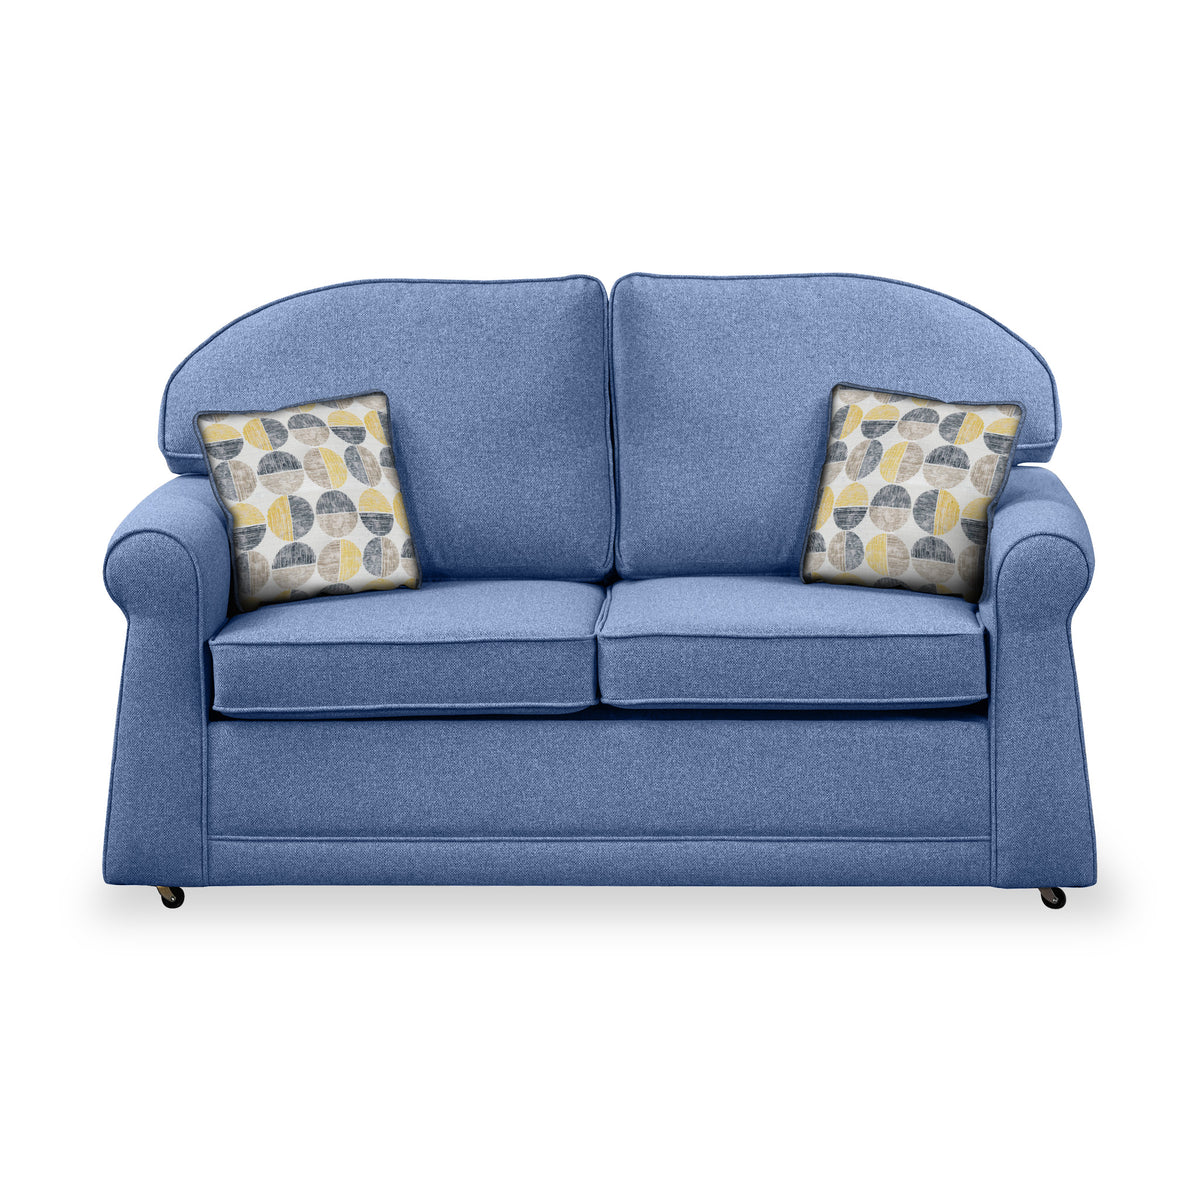 Croxdon Denim Faux Linen 2 Seater Sofabed with Beige Scatter Cushions from Roseland Furniture